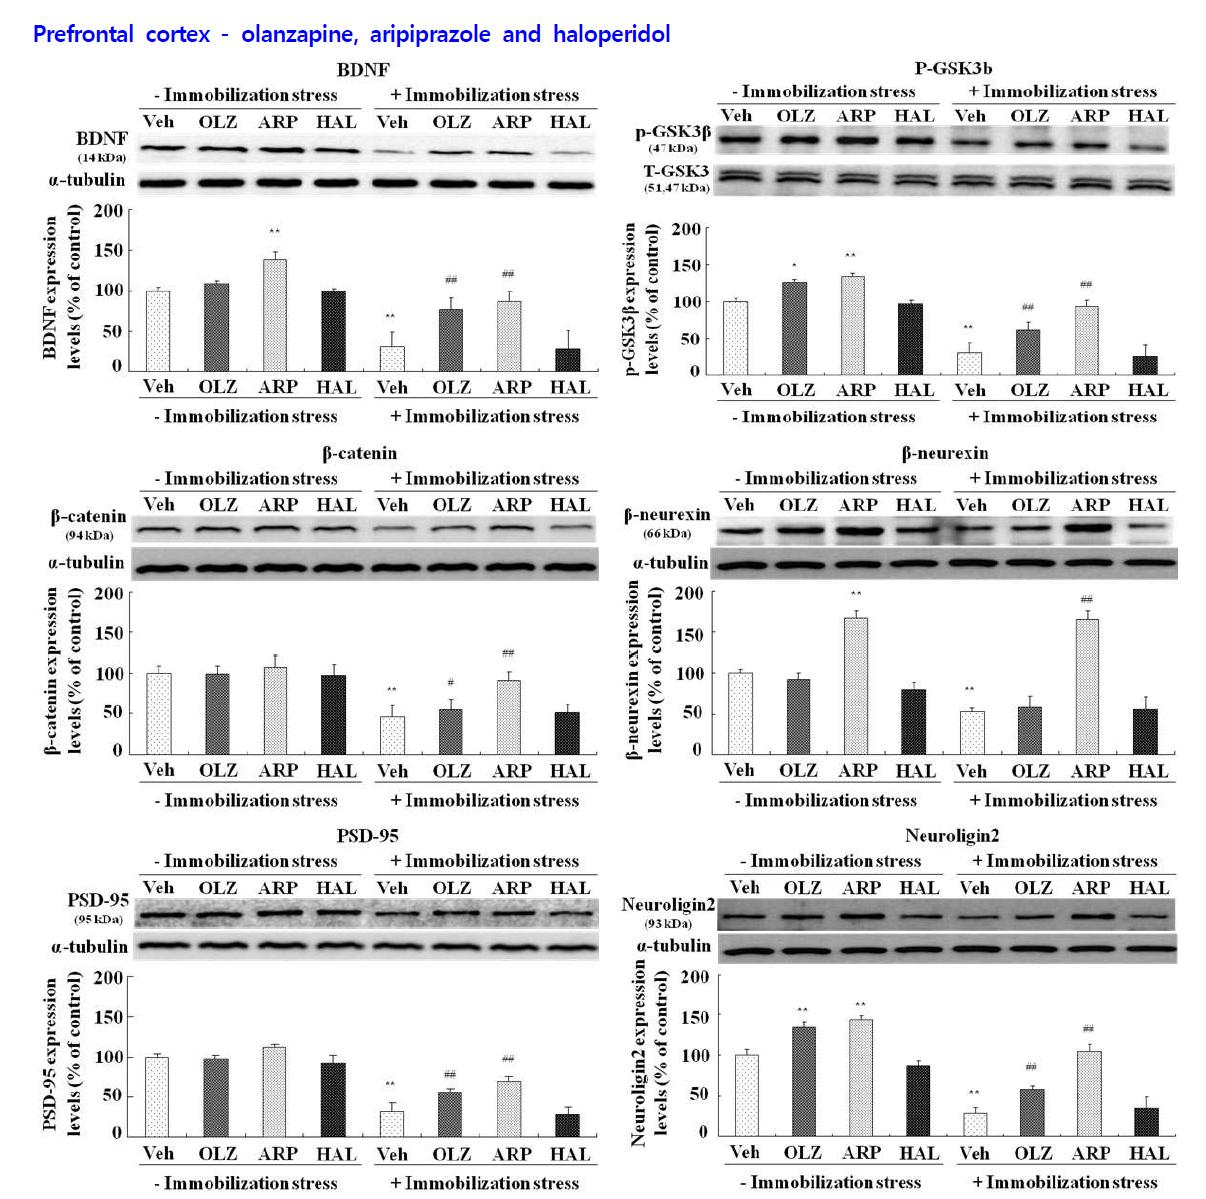 Effects of antipsychotic drugs on the levels of BDNF, phospho-ser9-GSK-3β, β-catenin, β-neurexin, PSD-95 and neurologin 2 expression in prefrontal cortex of rats.